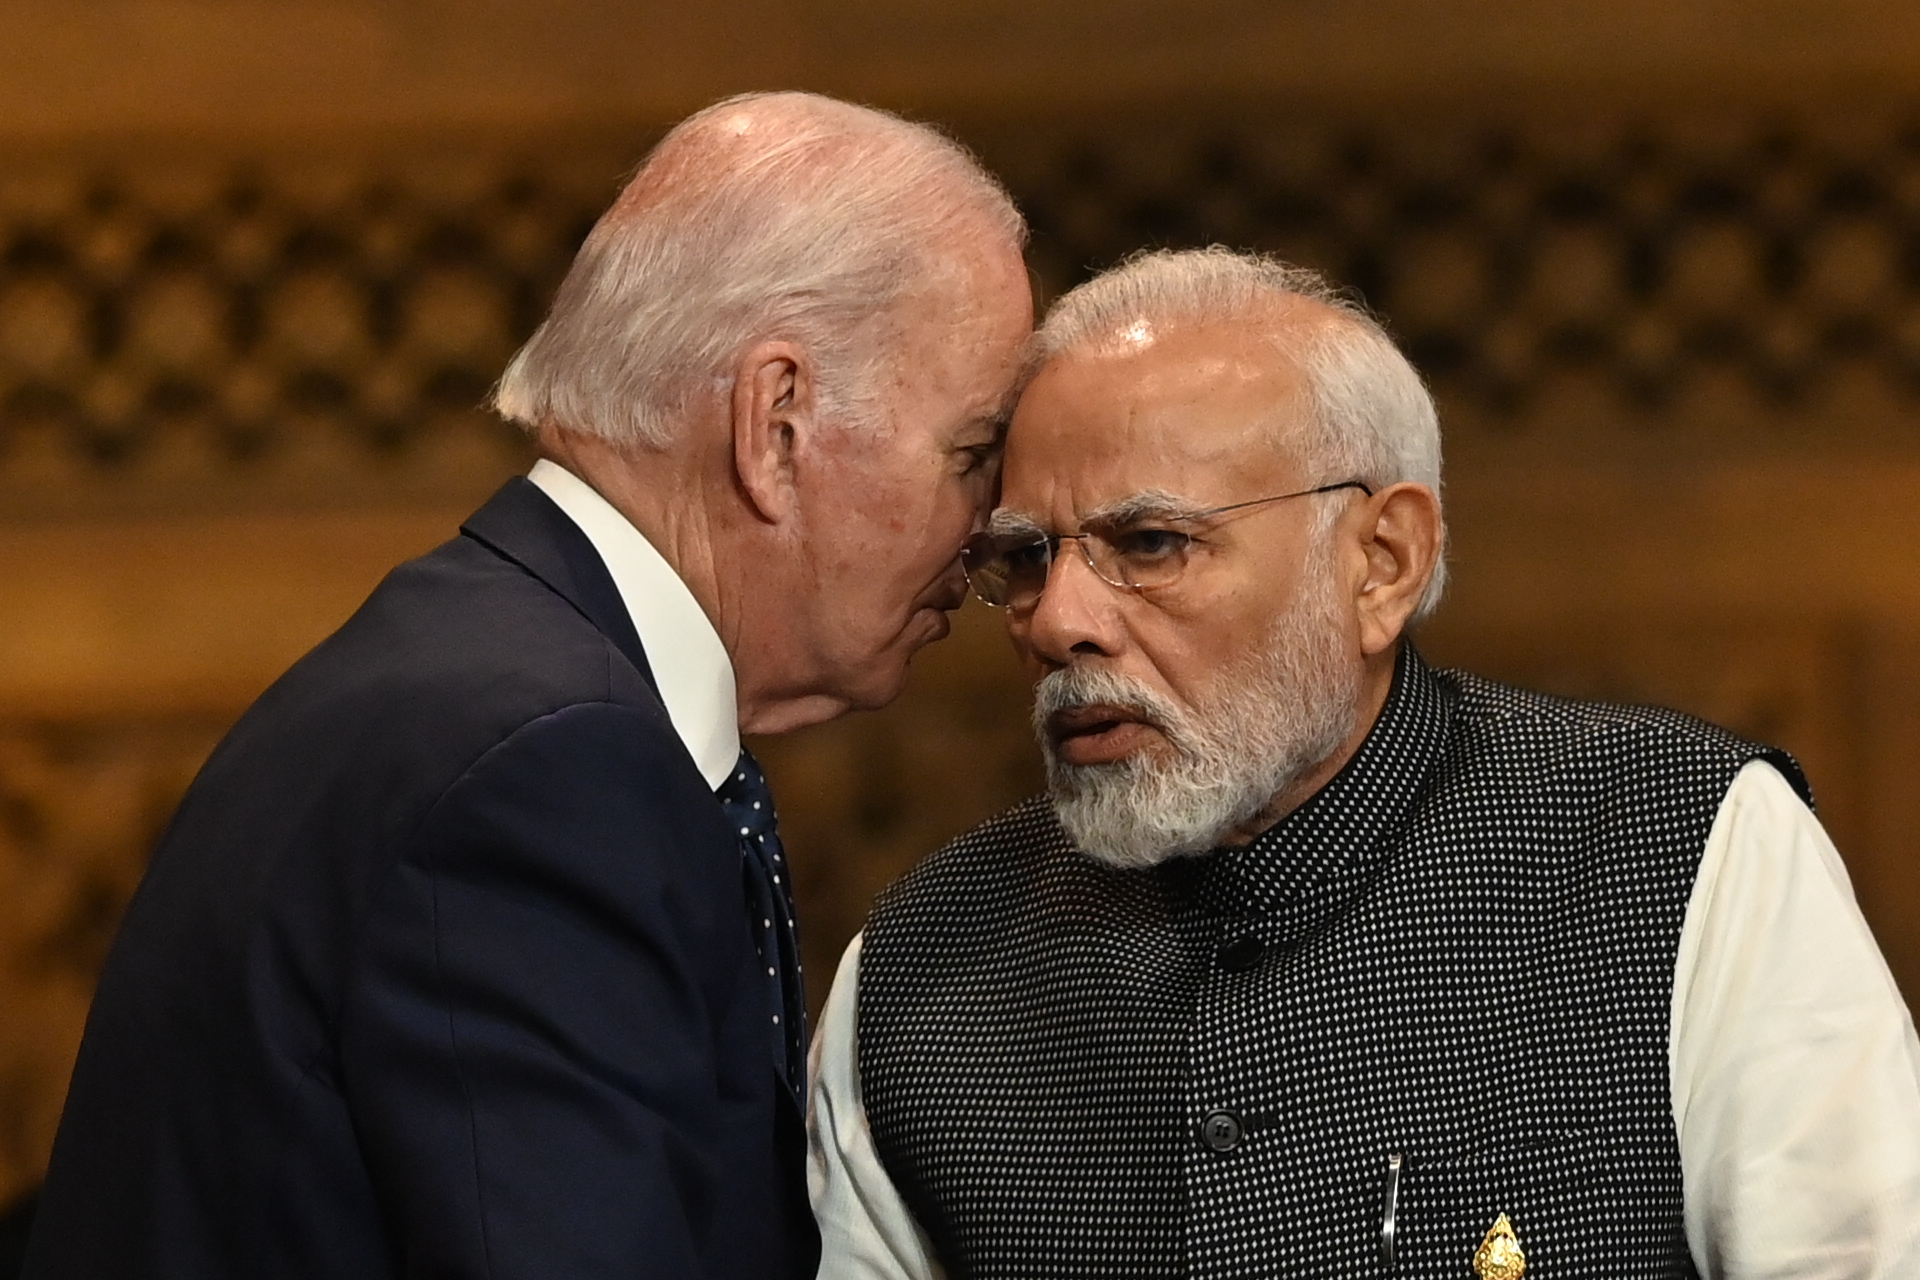 India will likely cool Russia ties in favor of the United States